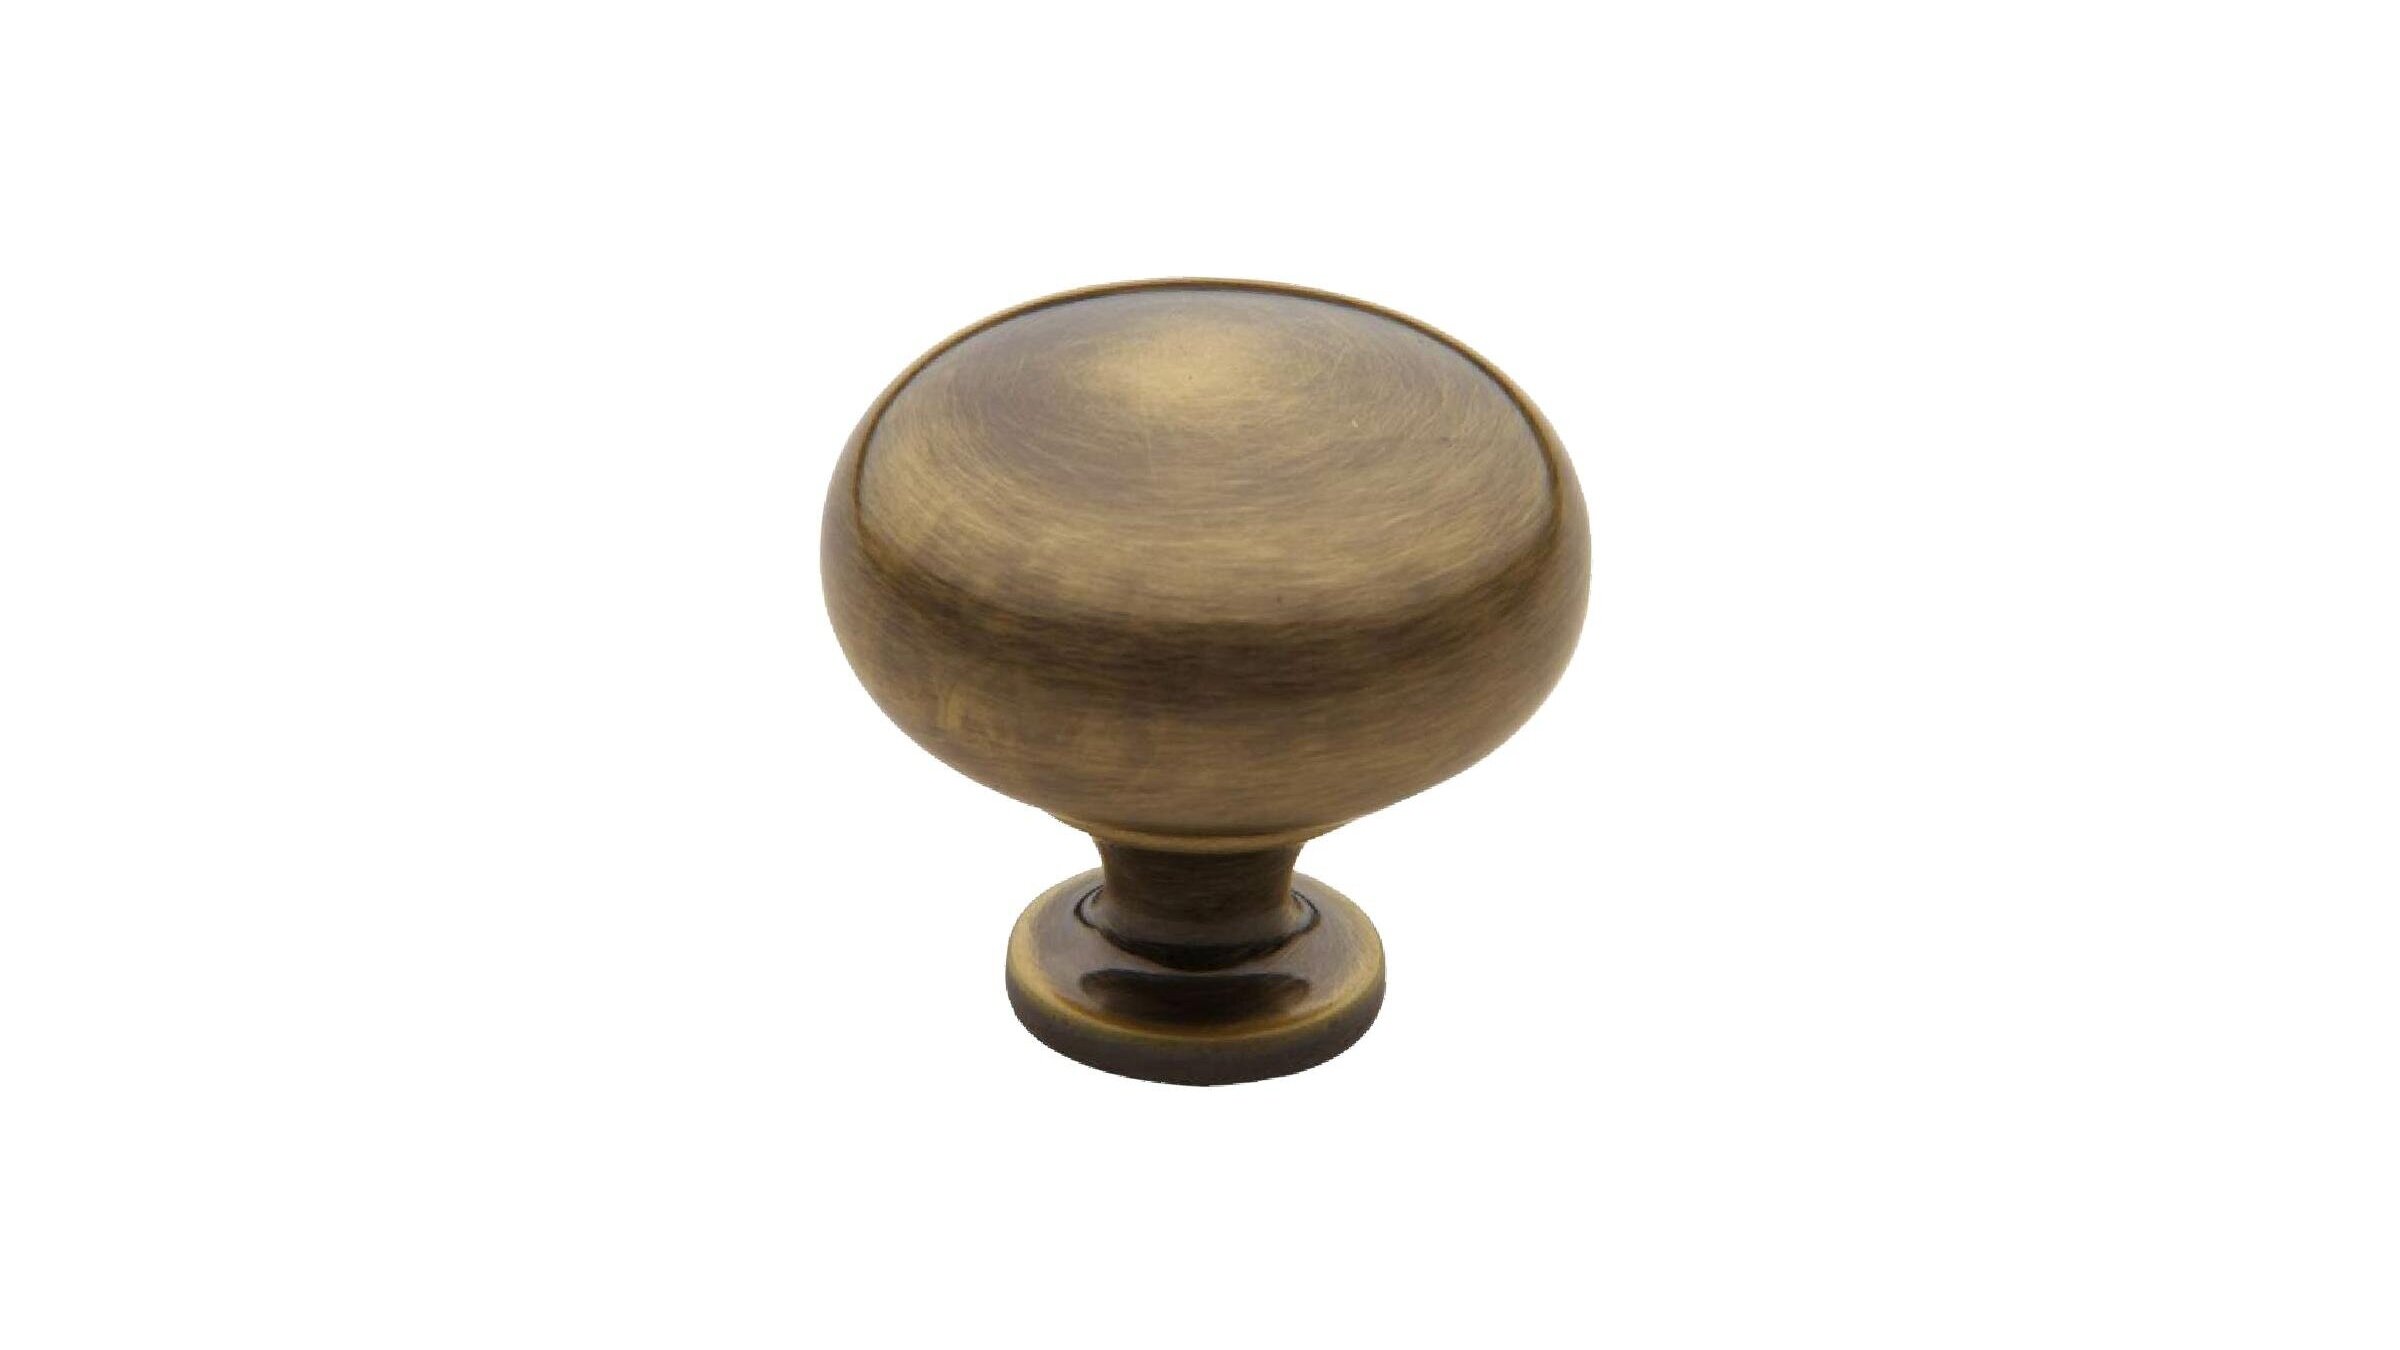 The High/Low List: Hardware Edition | Nadine Stay | Cabinet knobs and pulls for your kitchen cabinets, bathroom vanities, and dresser drawers. High end hardware and their less expensive lookalikes. Knurled hardware, brass pulls, edge pulls, brass kn…